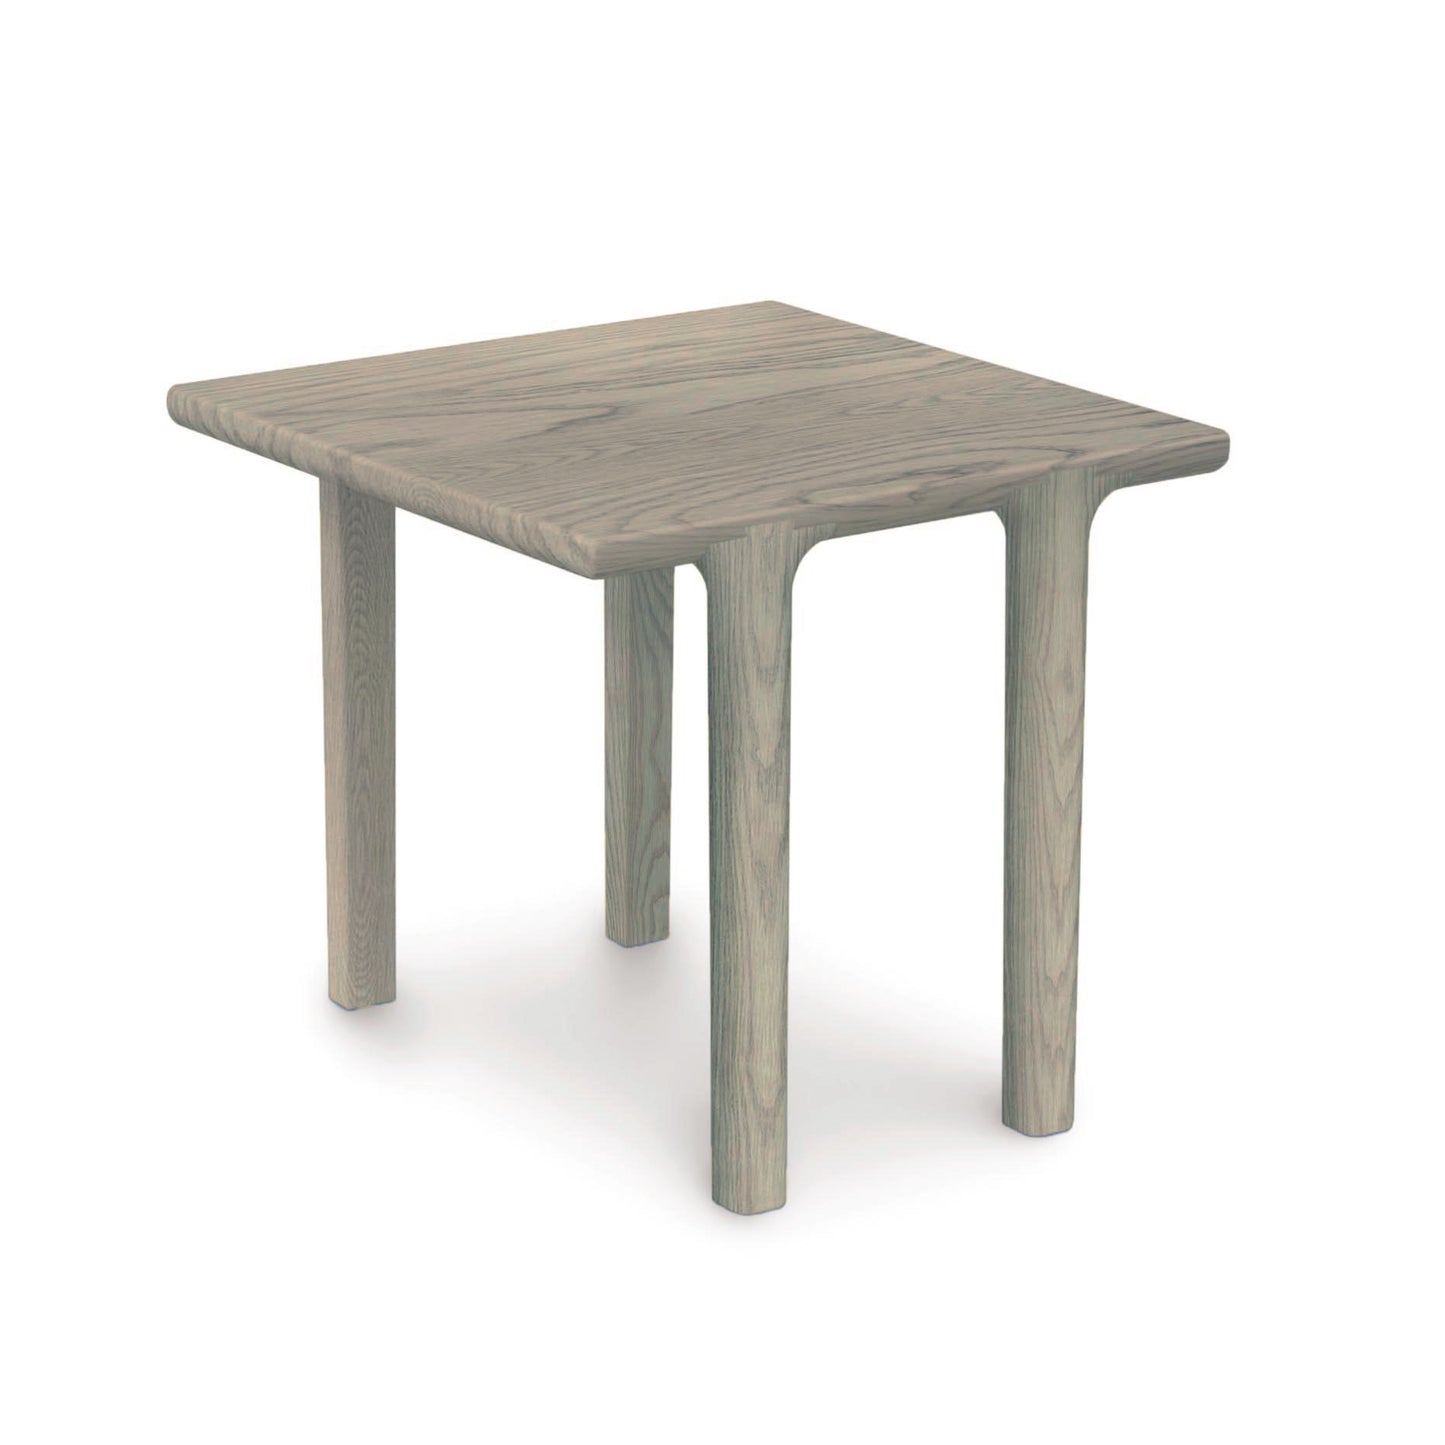 A contemporary Sierra Square End Table with legs by Copeland Furniture.